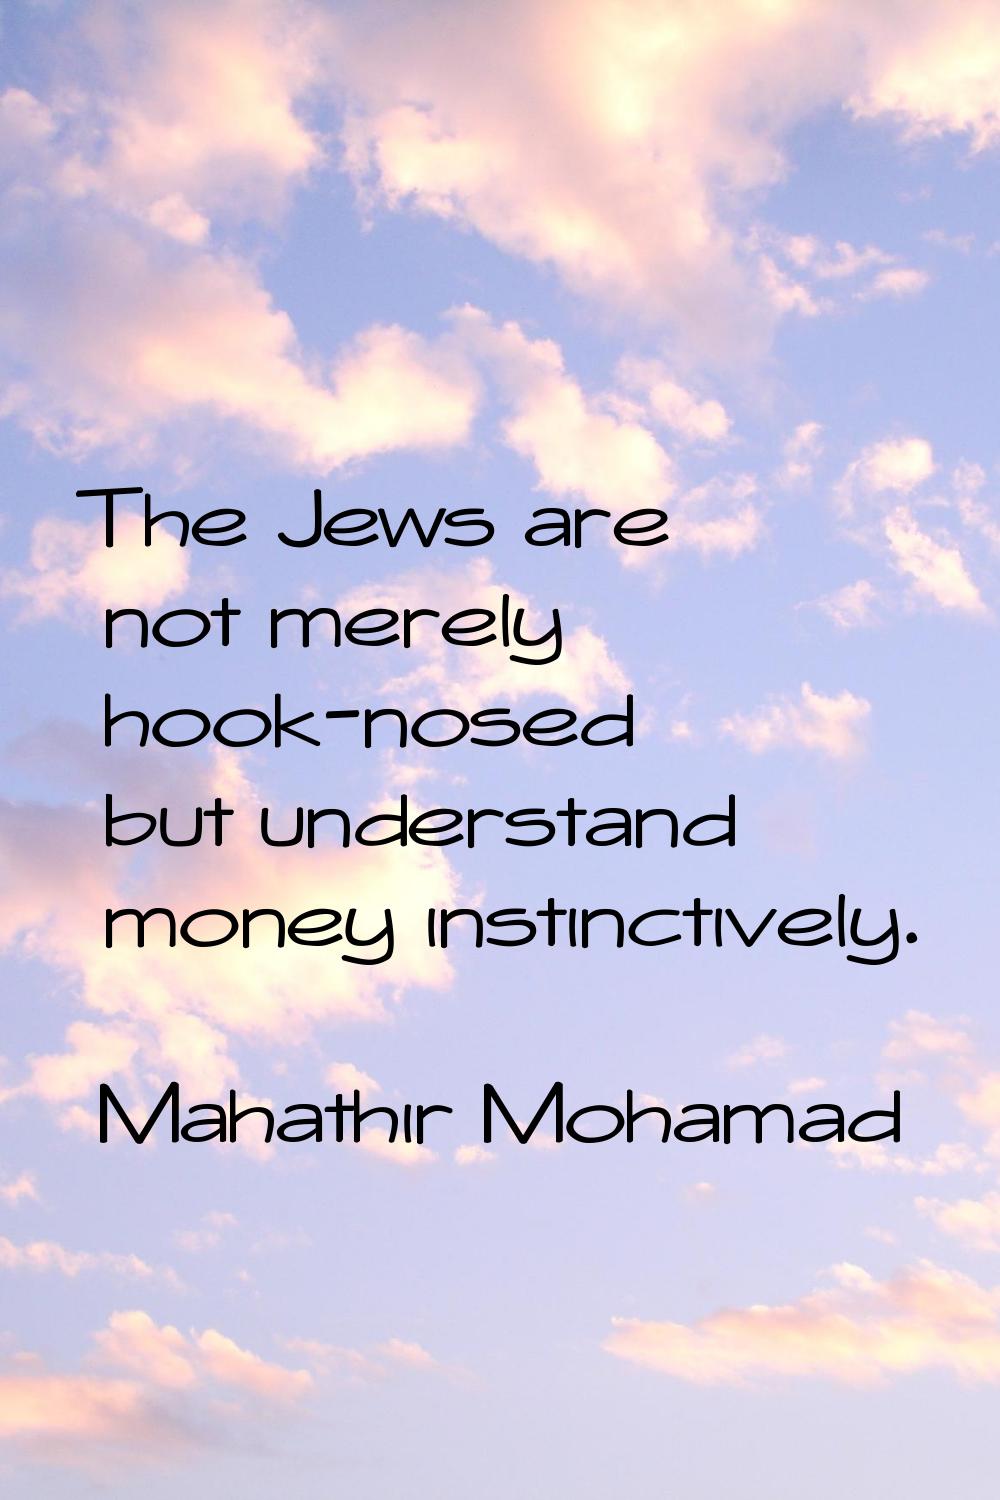 The Jews are not merely hook-nosed but understand money instinctively.